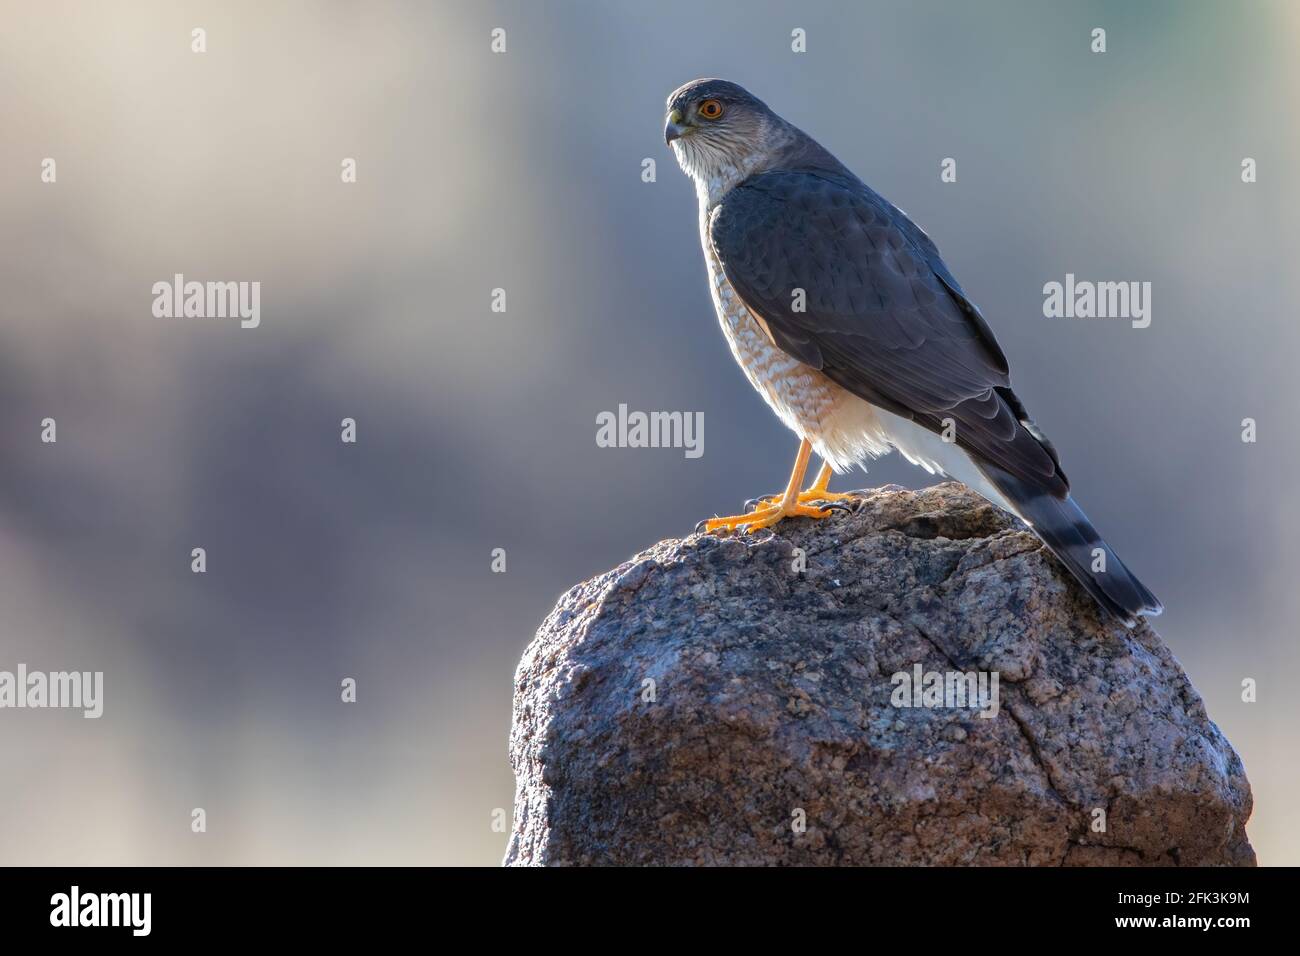 Sharp-shinned Hawk (Accipiter striatus) adult male perched on a rock Stock Photo